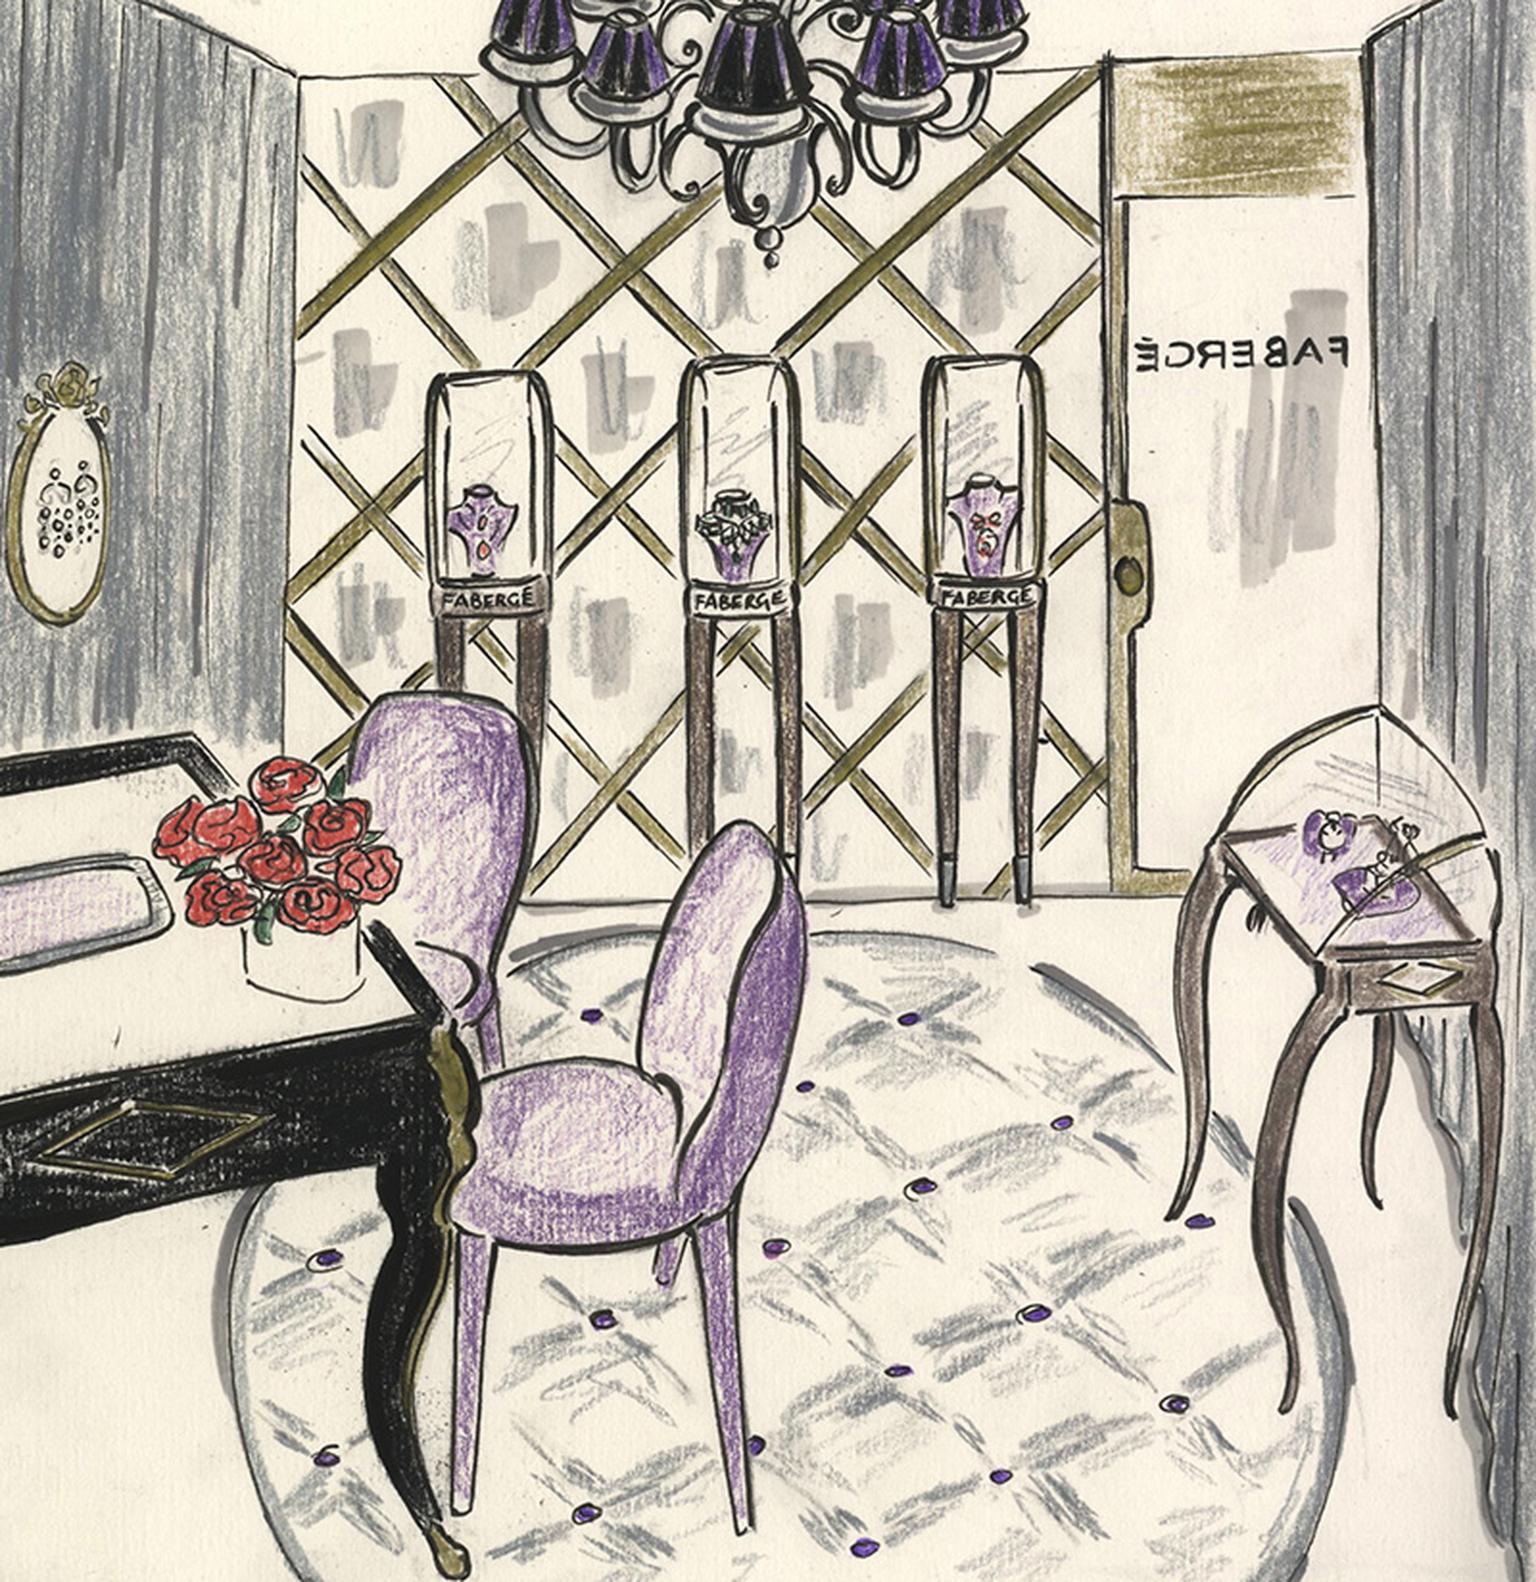 Faberge-New-York-Madison-Avenue-Boutique-Sketch.jpg